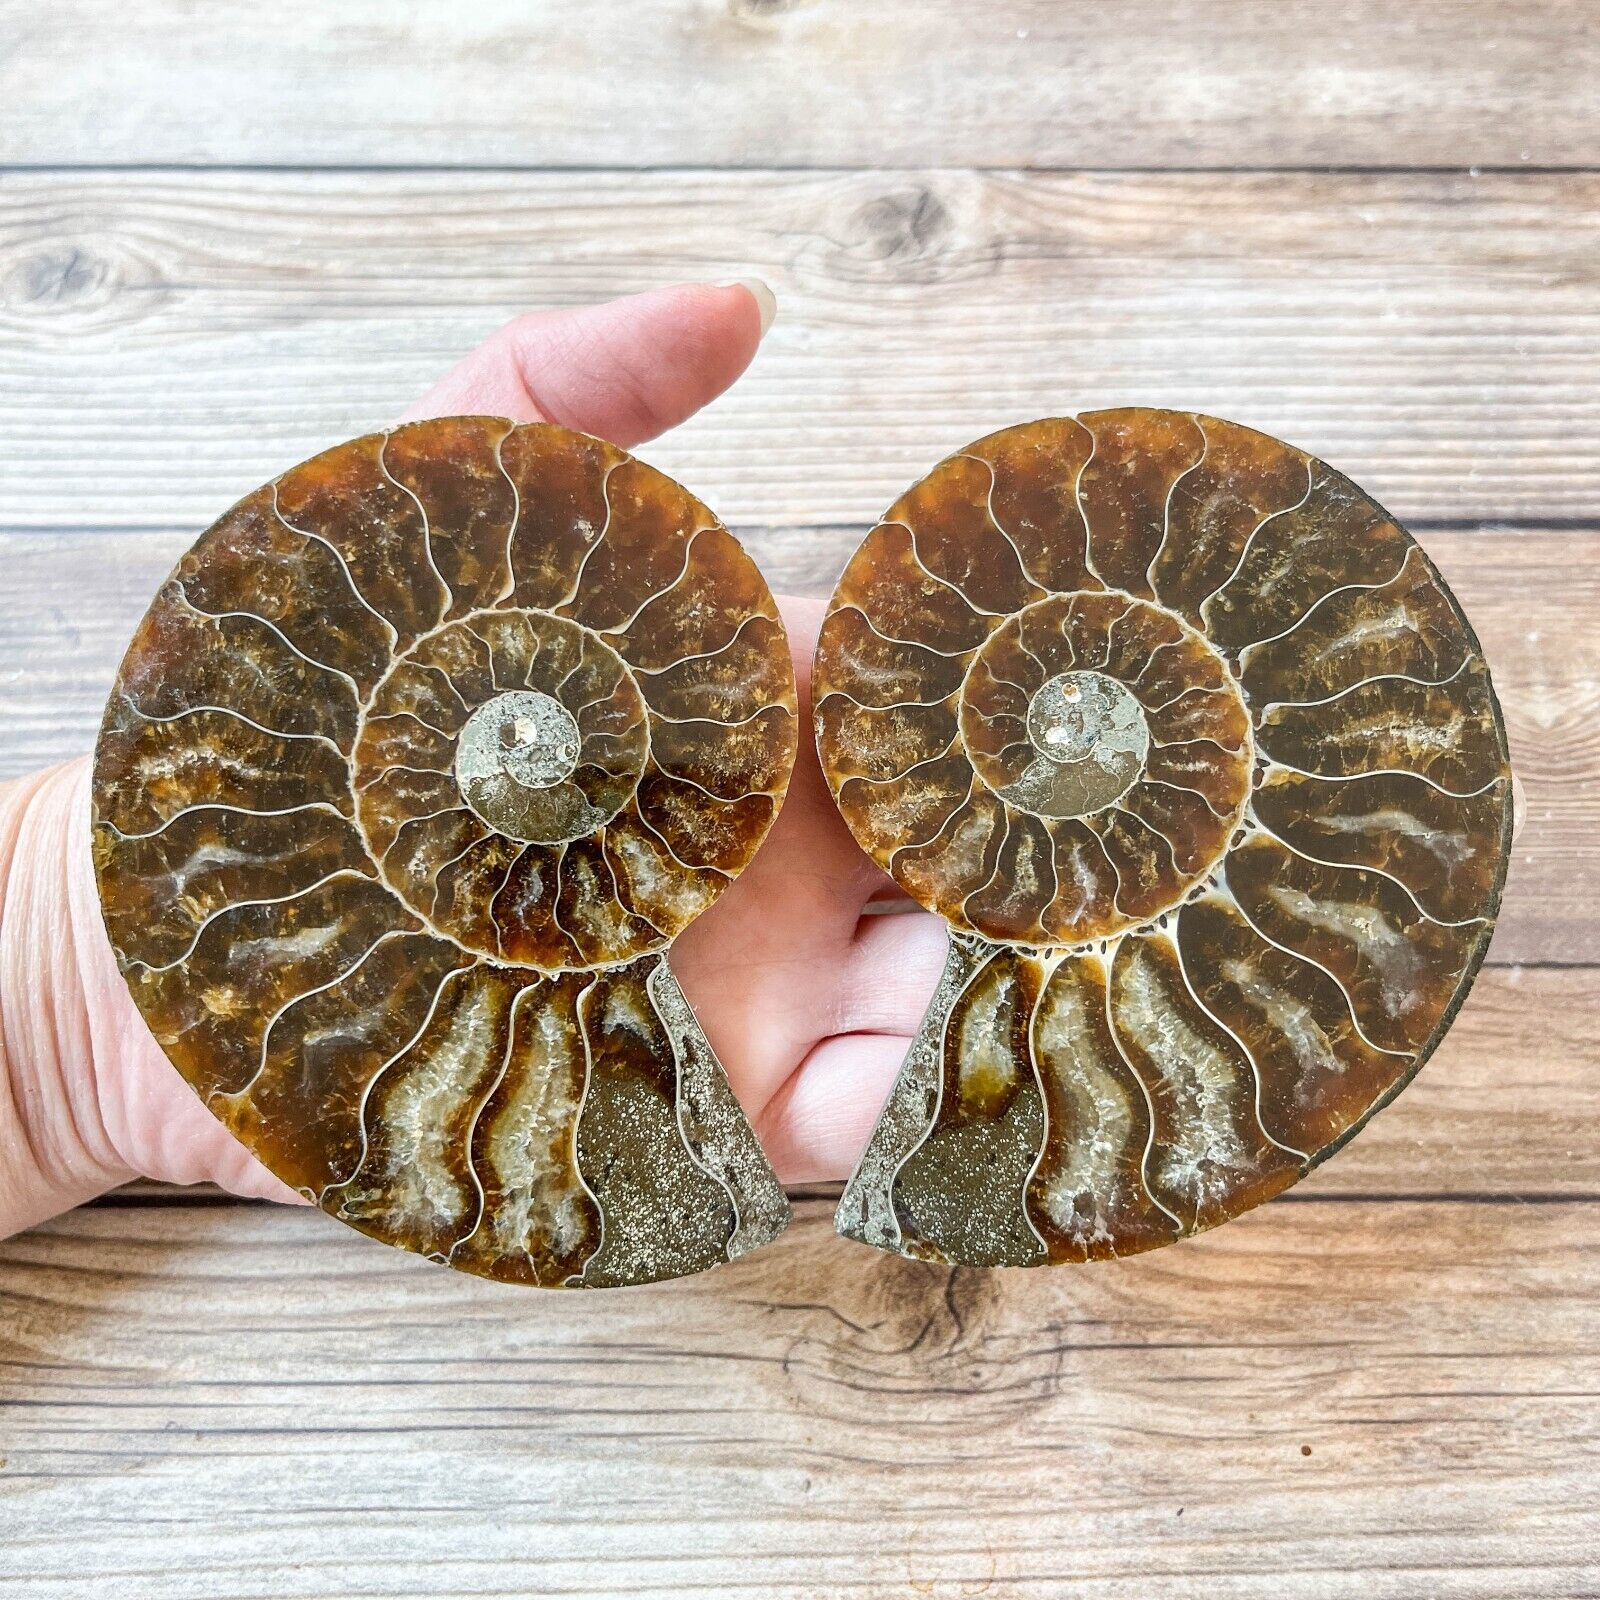 Ammonite Fossil Pair with Calcite Chambers 226g, Polished